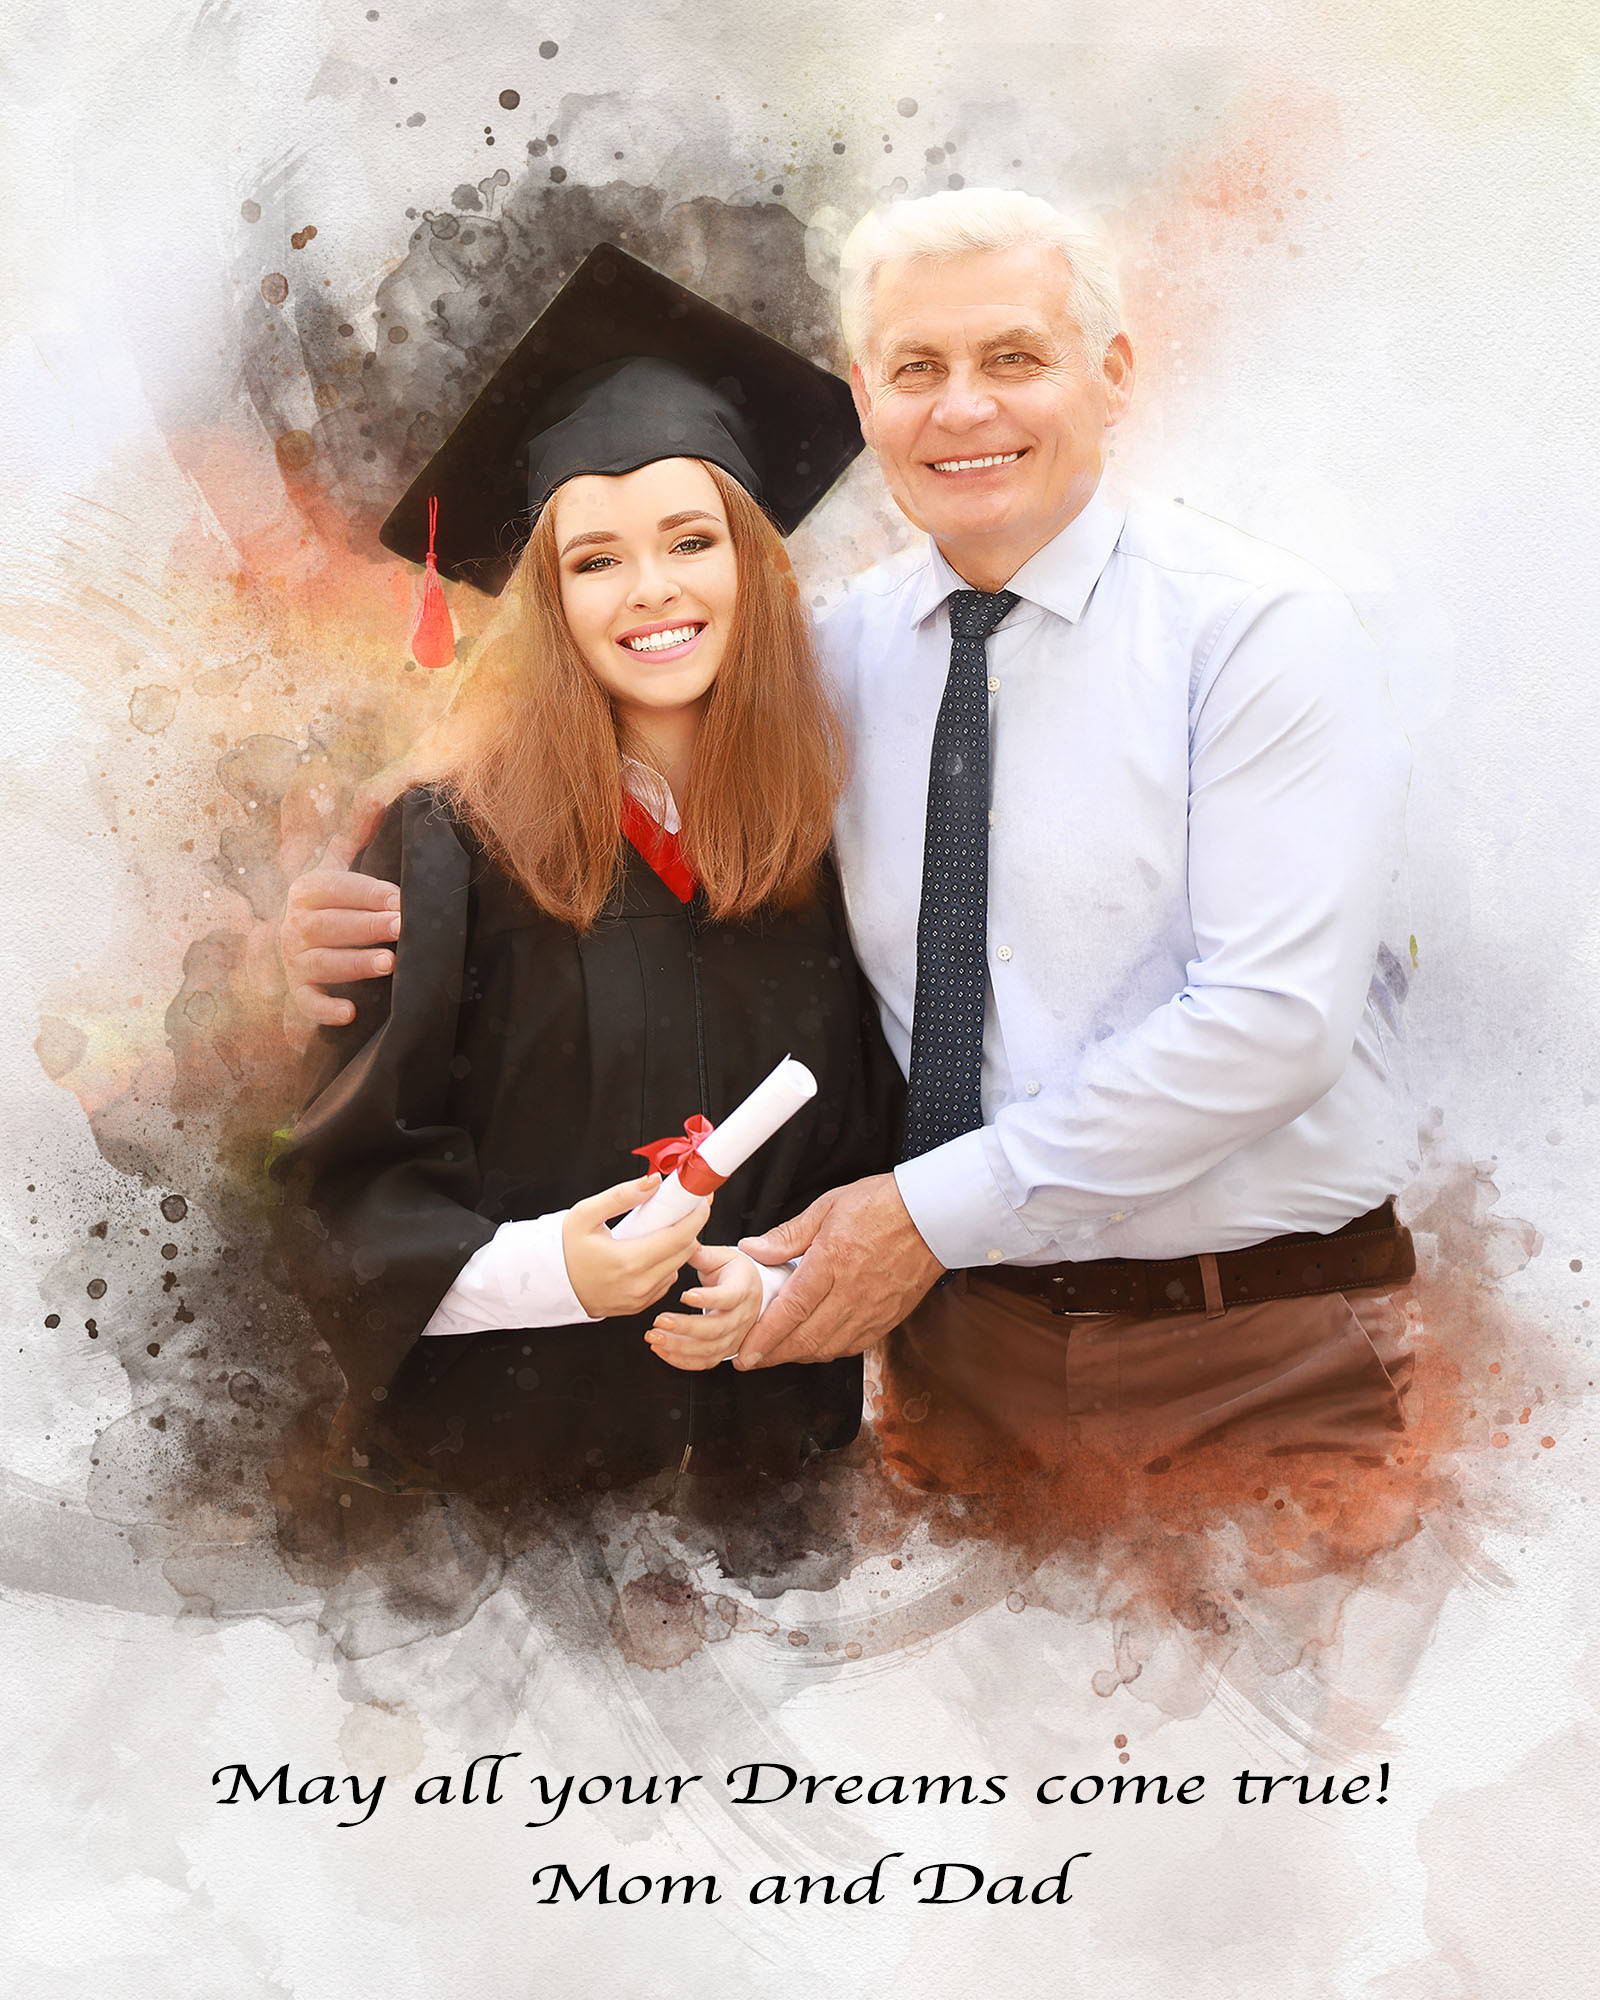 Graduation Portrait Painting 5 - Made by FromPicToArt